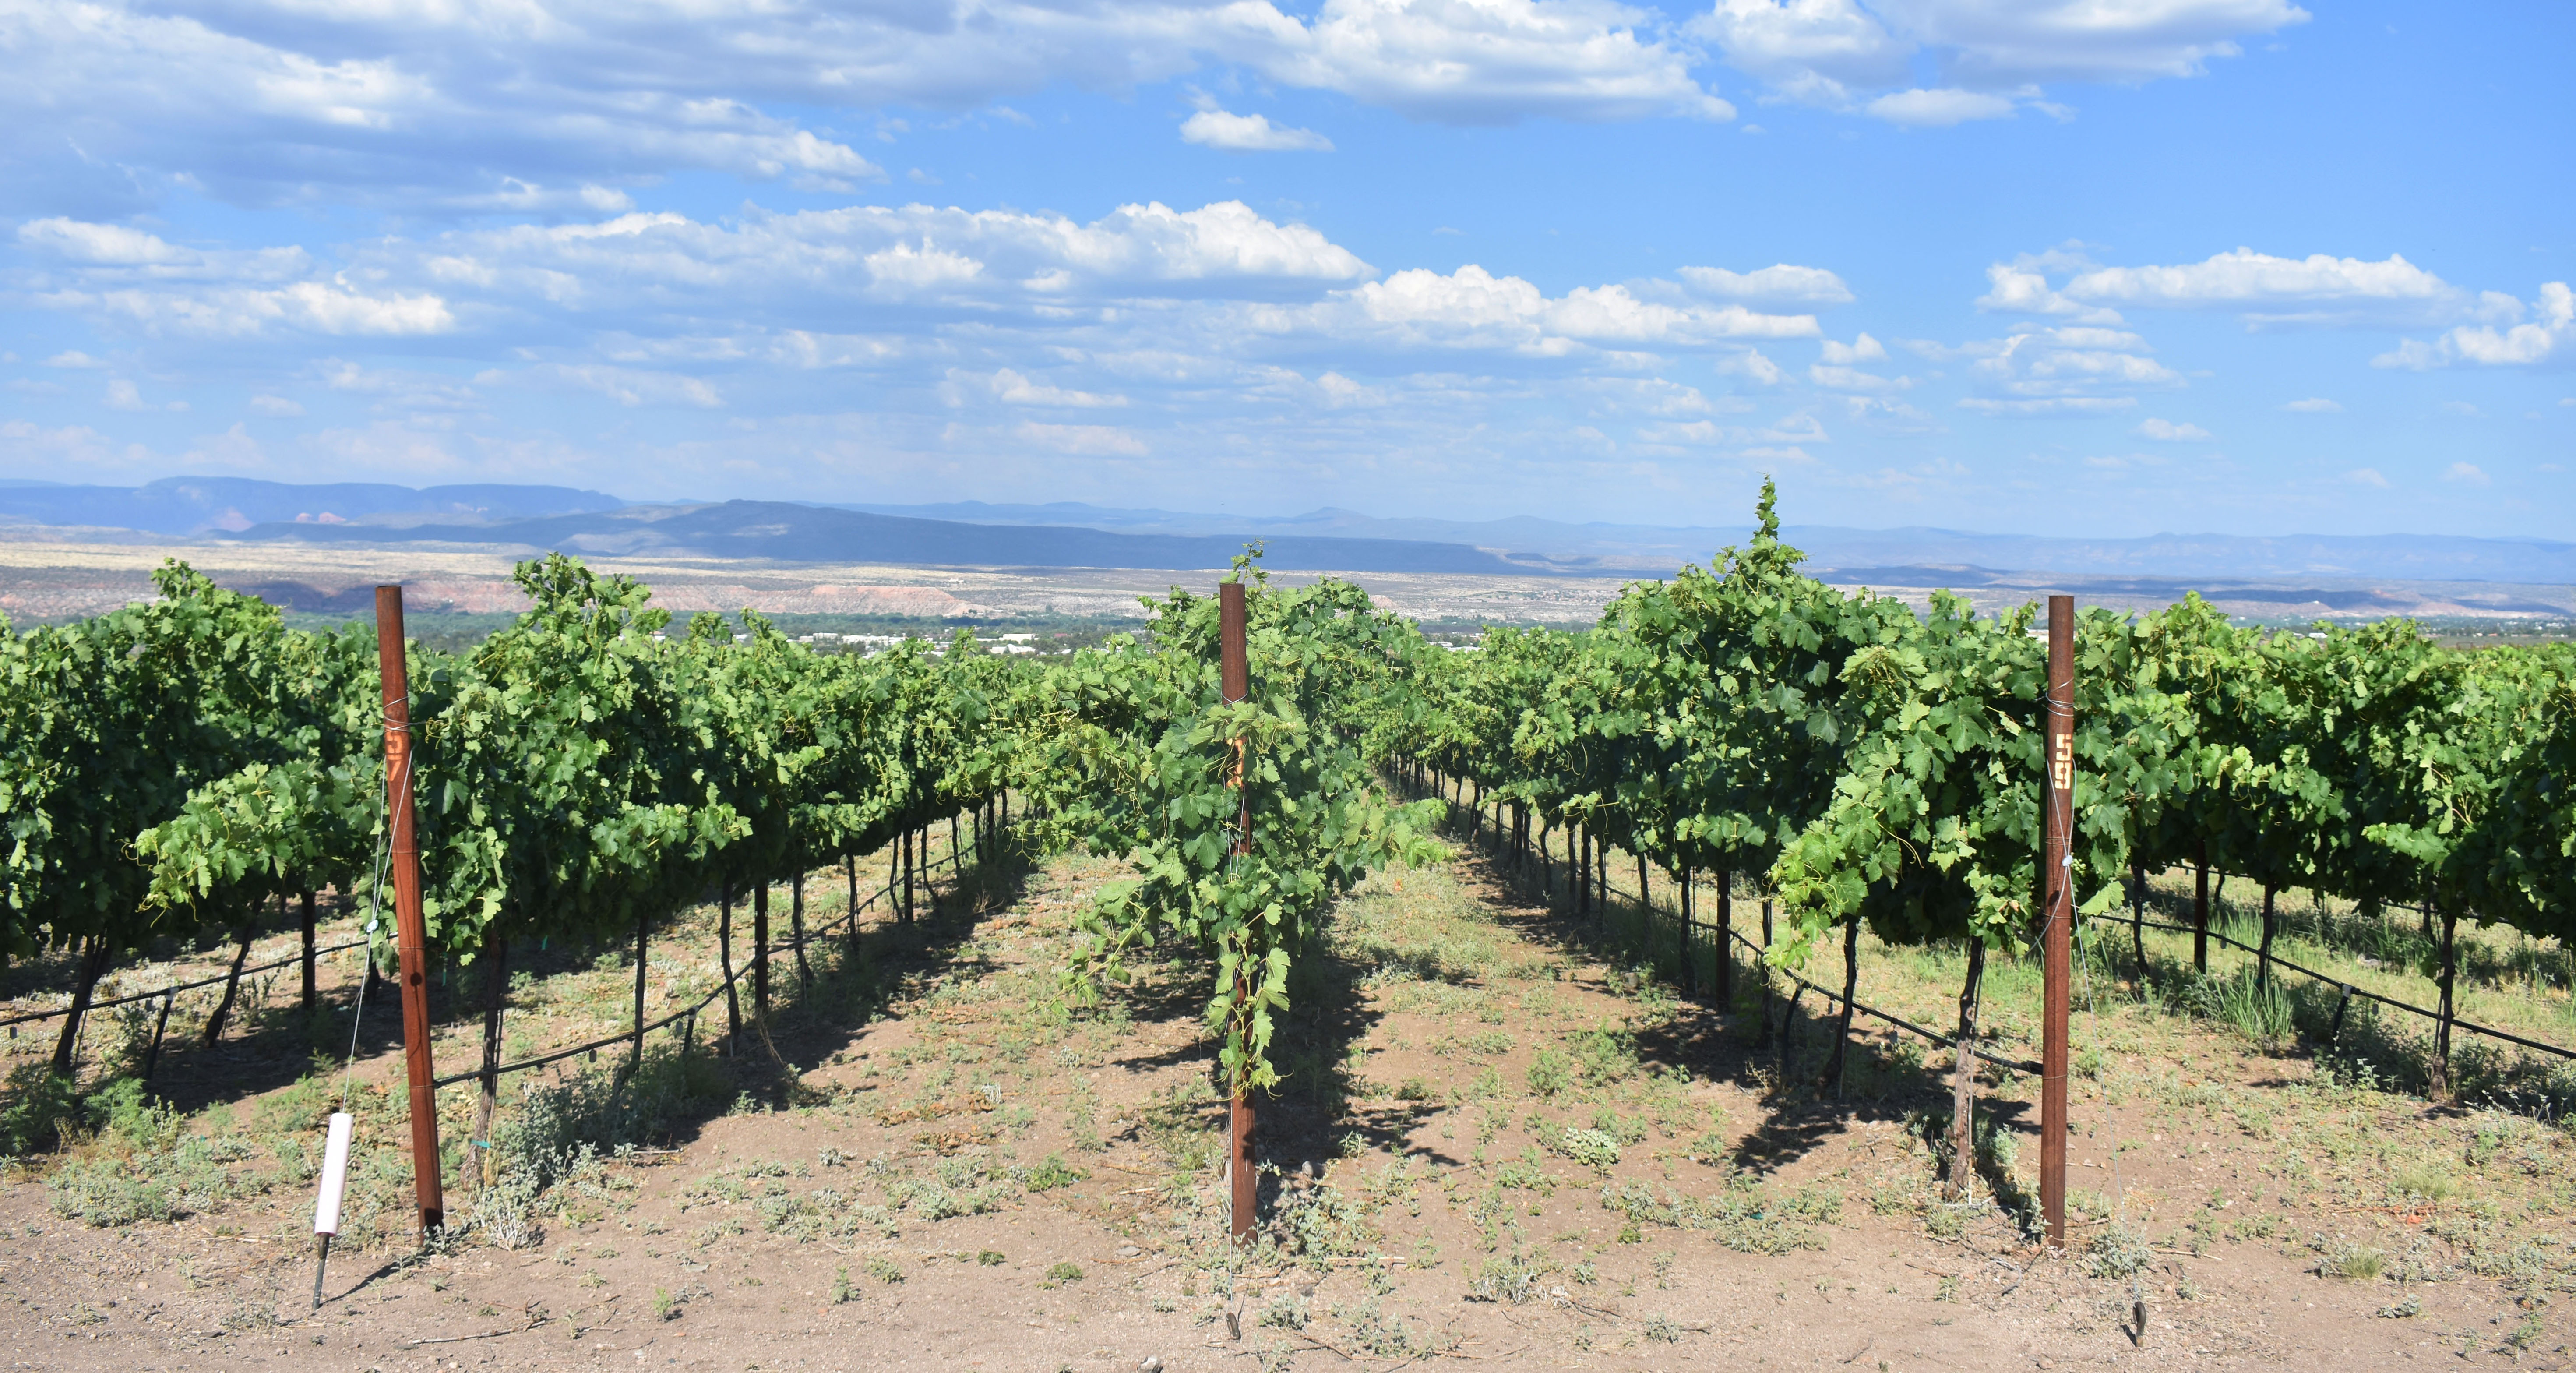 Verde Valley ranked 4th on national list of best wine regions The